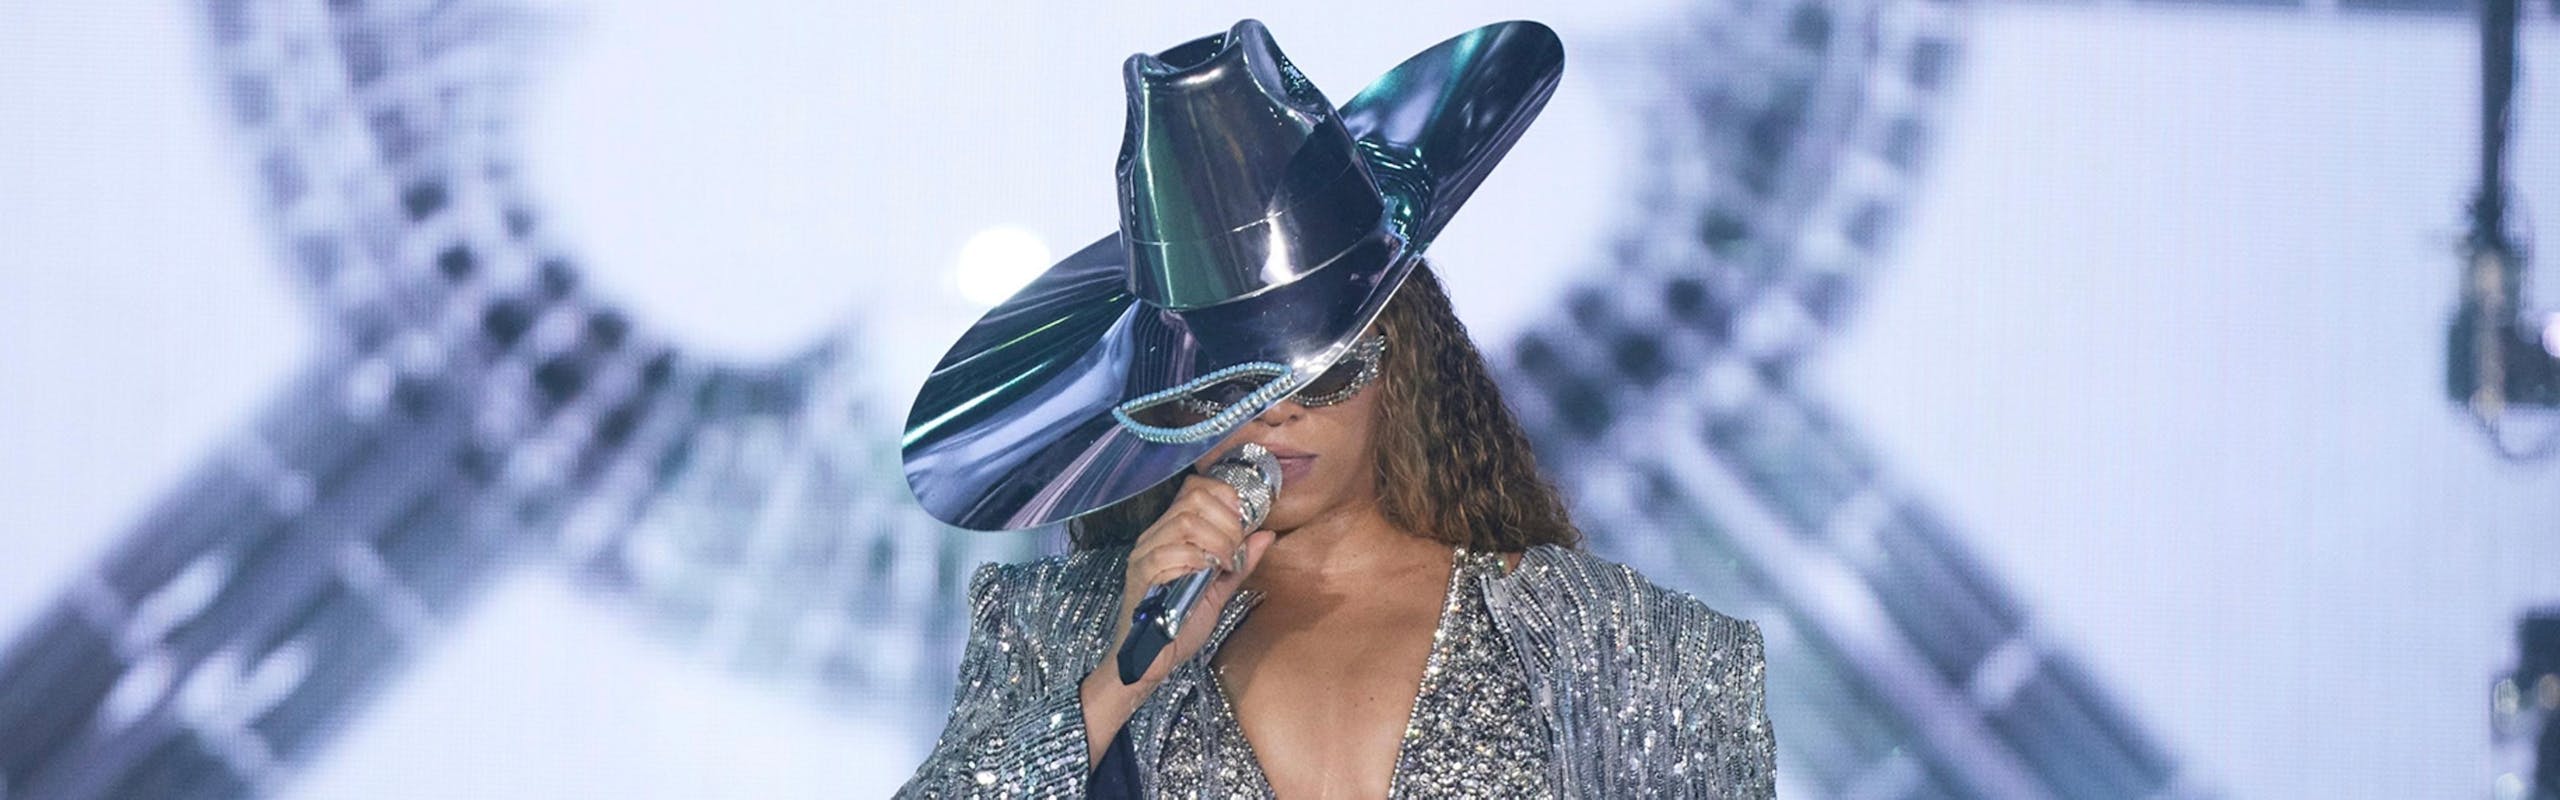 beyonce in sequin mini dress, fringe maxi coat, and cowboy hat